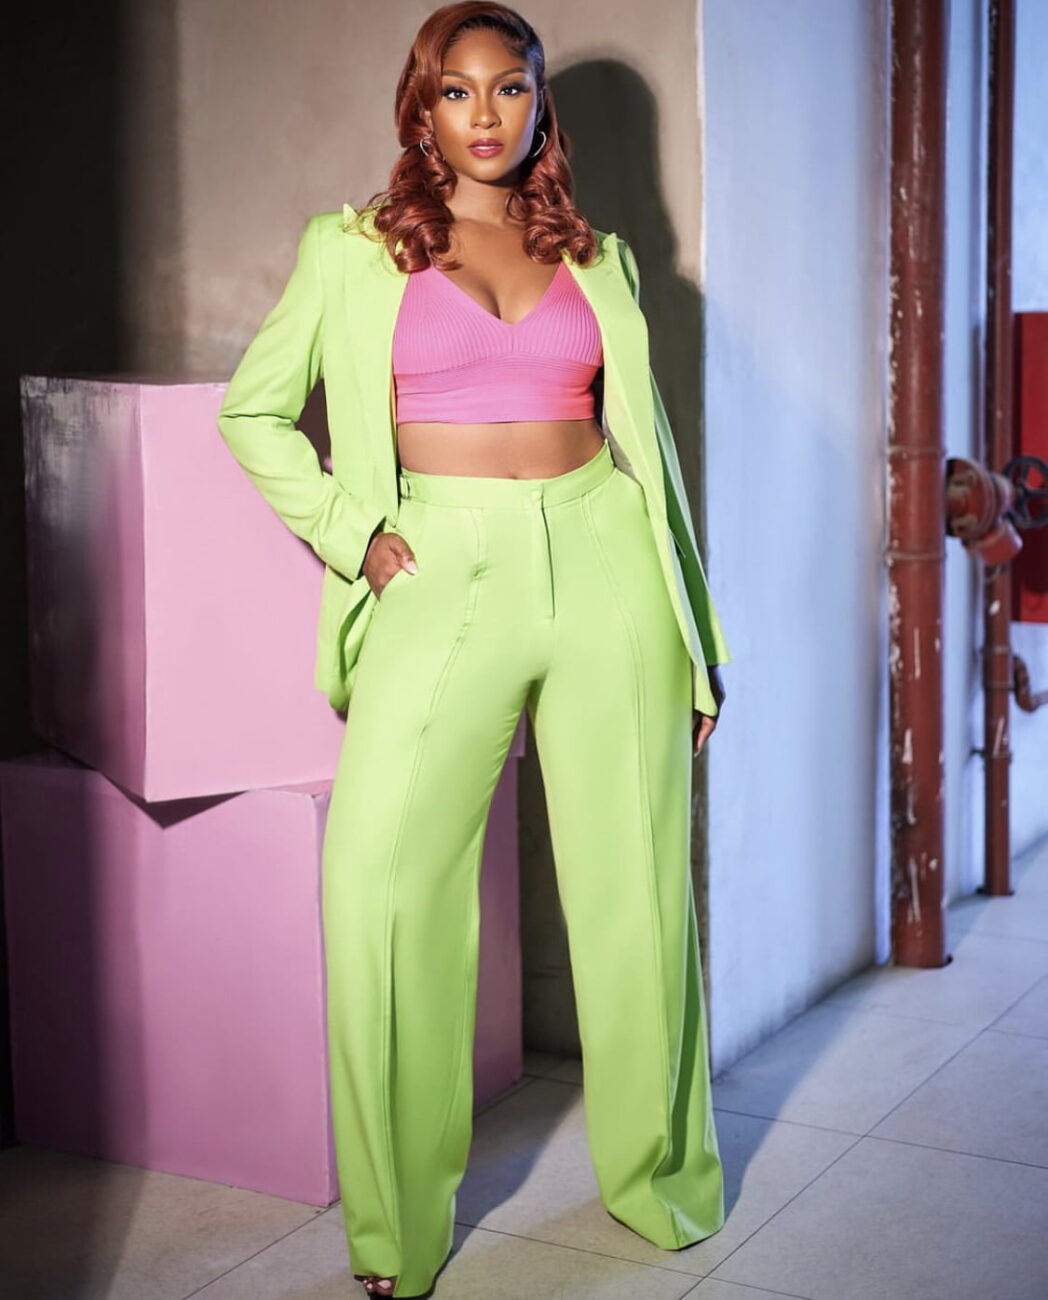 Osas Ighodaro in a neon green suit.